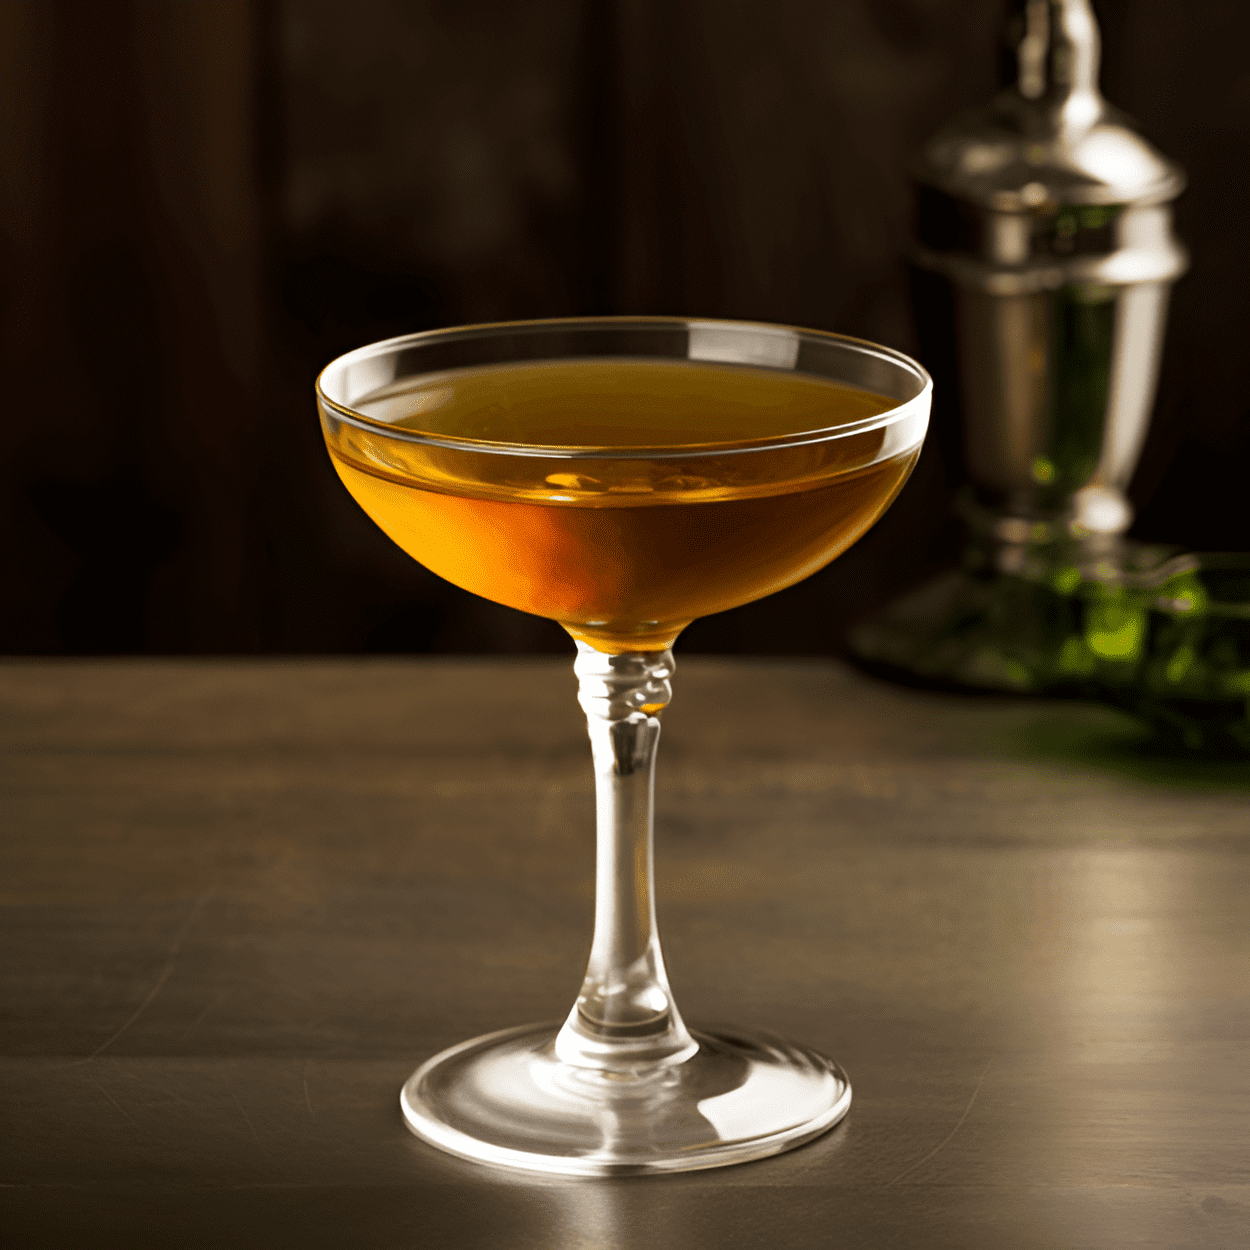 Tipperary Cocktail Recipe - The Tipperary cocktail is a well-balanced mix of flavors, offering a slightly sweet and herbal taste with a hint of bitterness. The Irish whiskey provides a smooth, warm base, while the green Chartreuse adds a touch of herbal complexity. The sweet vermouth rounds out the flavors, making it a delightful and sophisticated cocktail.